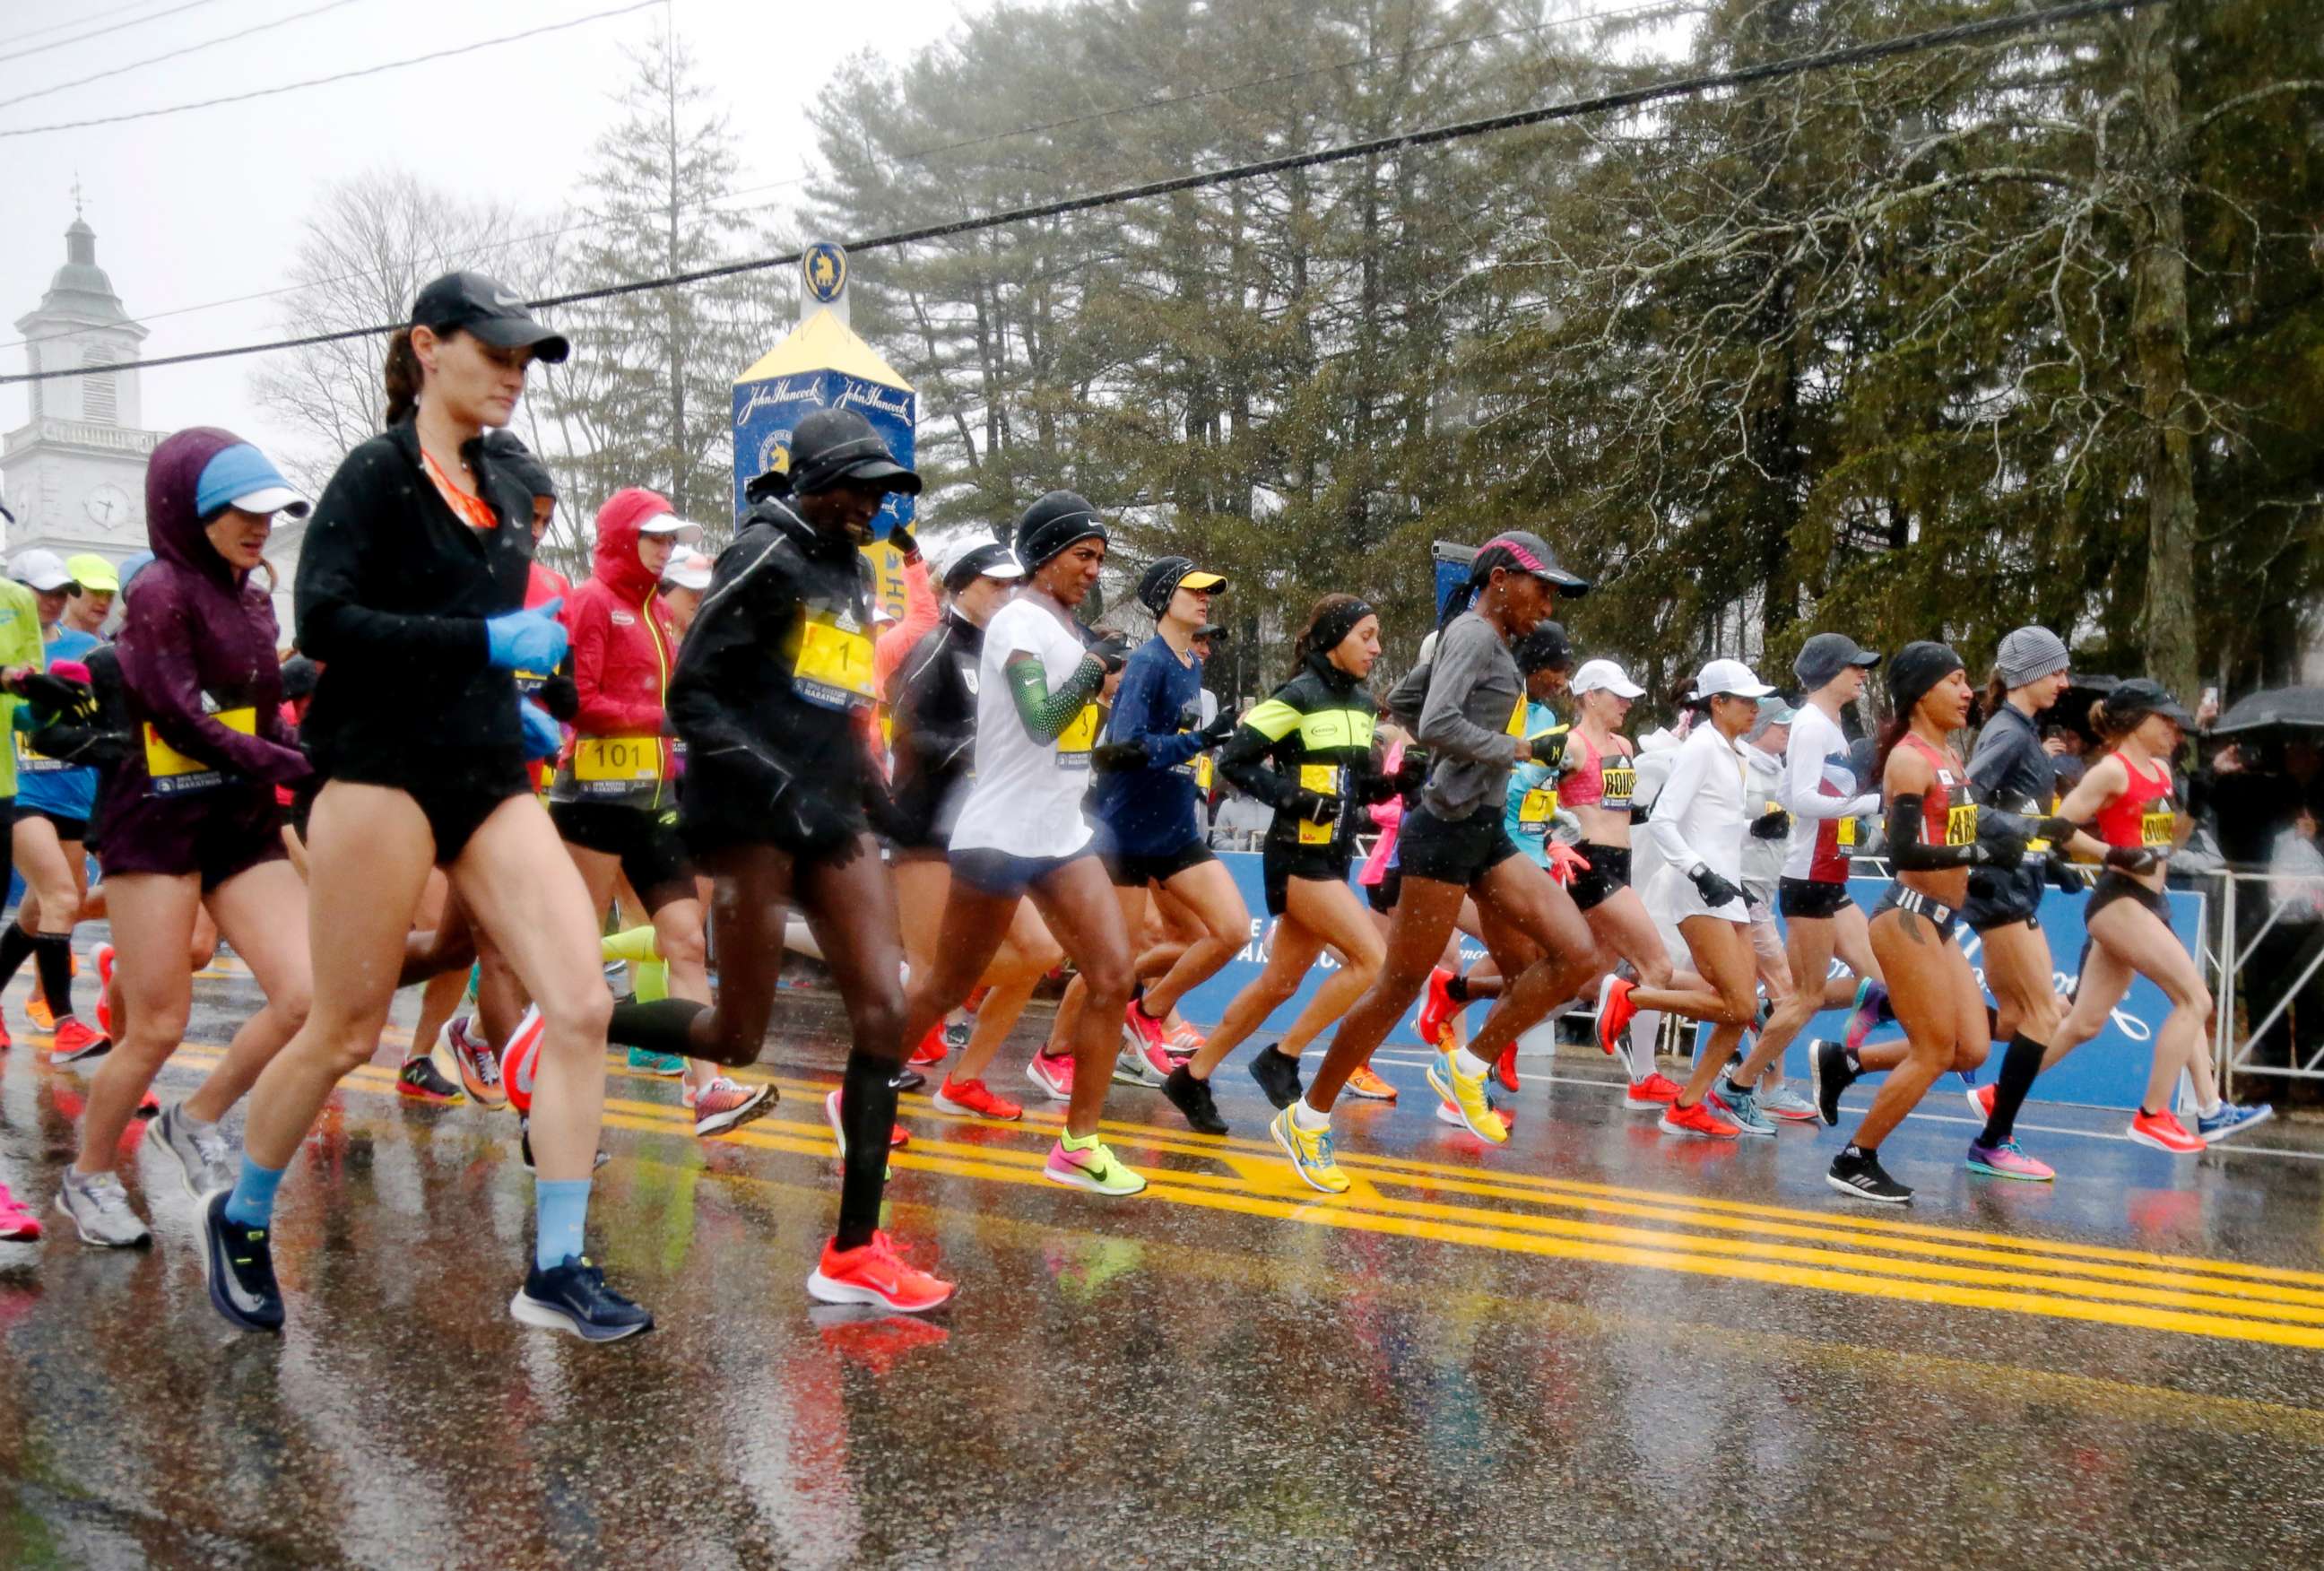 PHOTO: The elite female runners break from the starting line in a downpour during the 122nd running of the Boston Marathon in Hopkinton, Mass., April 16, 2018.